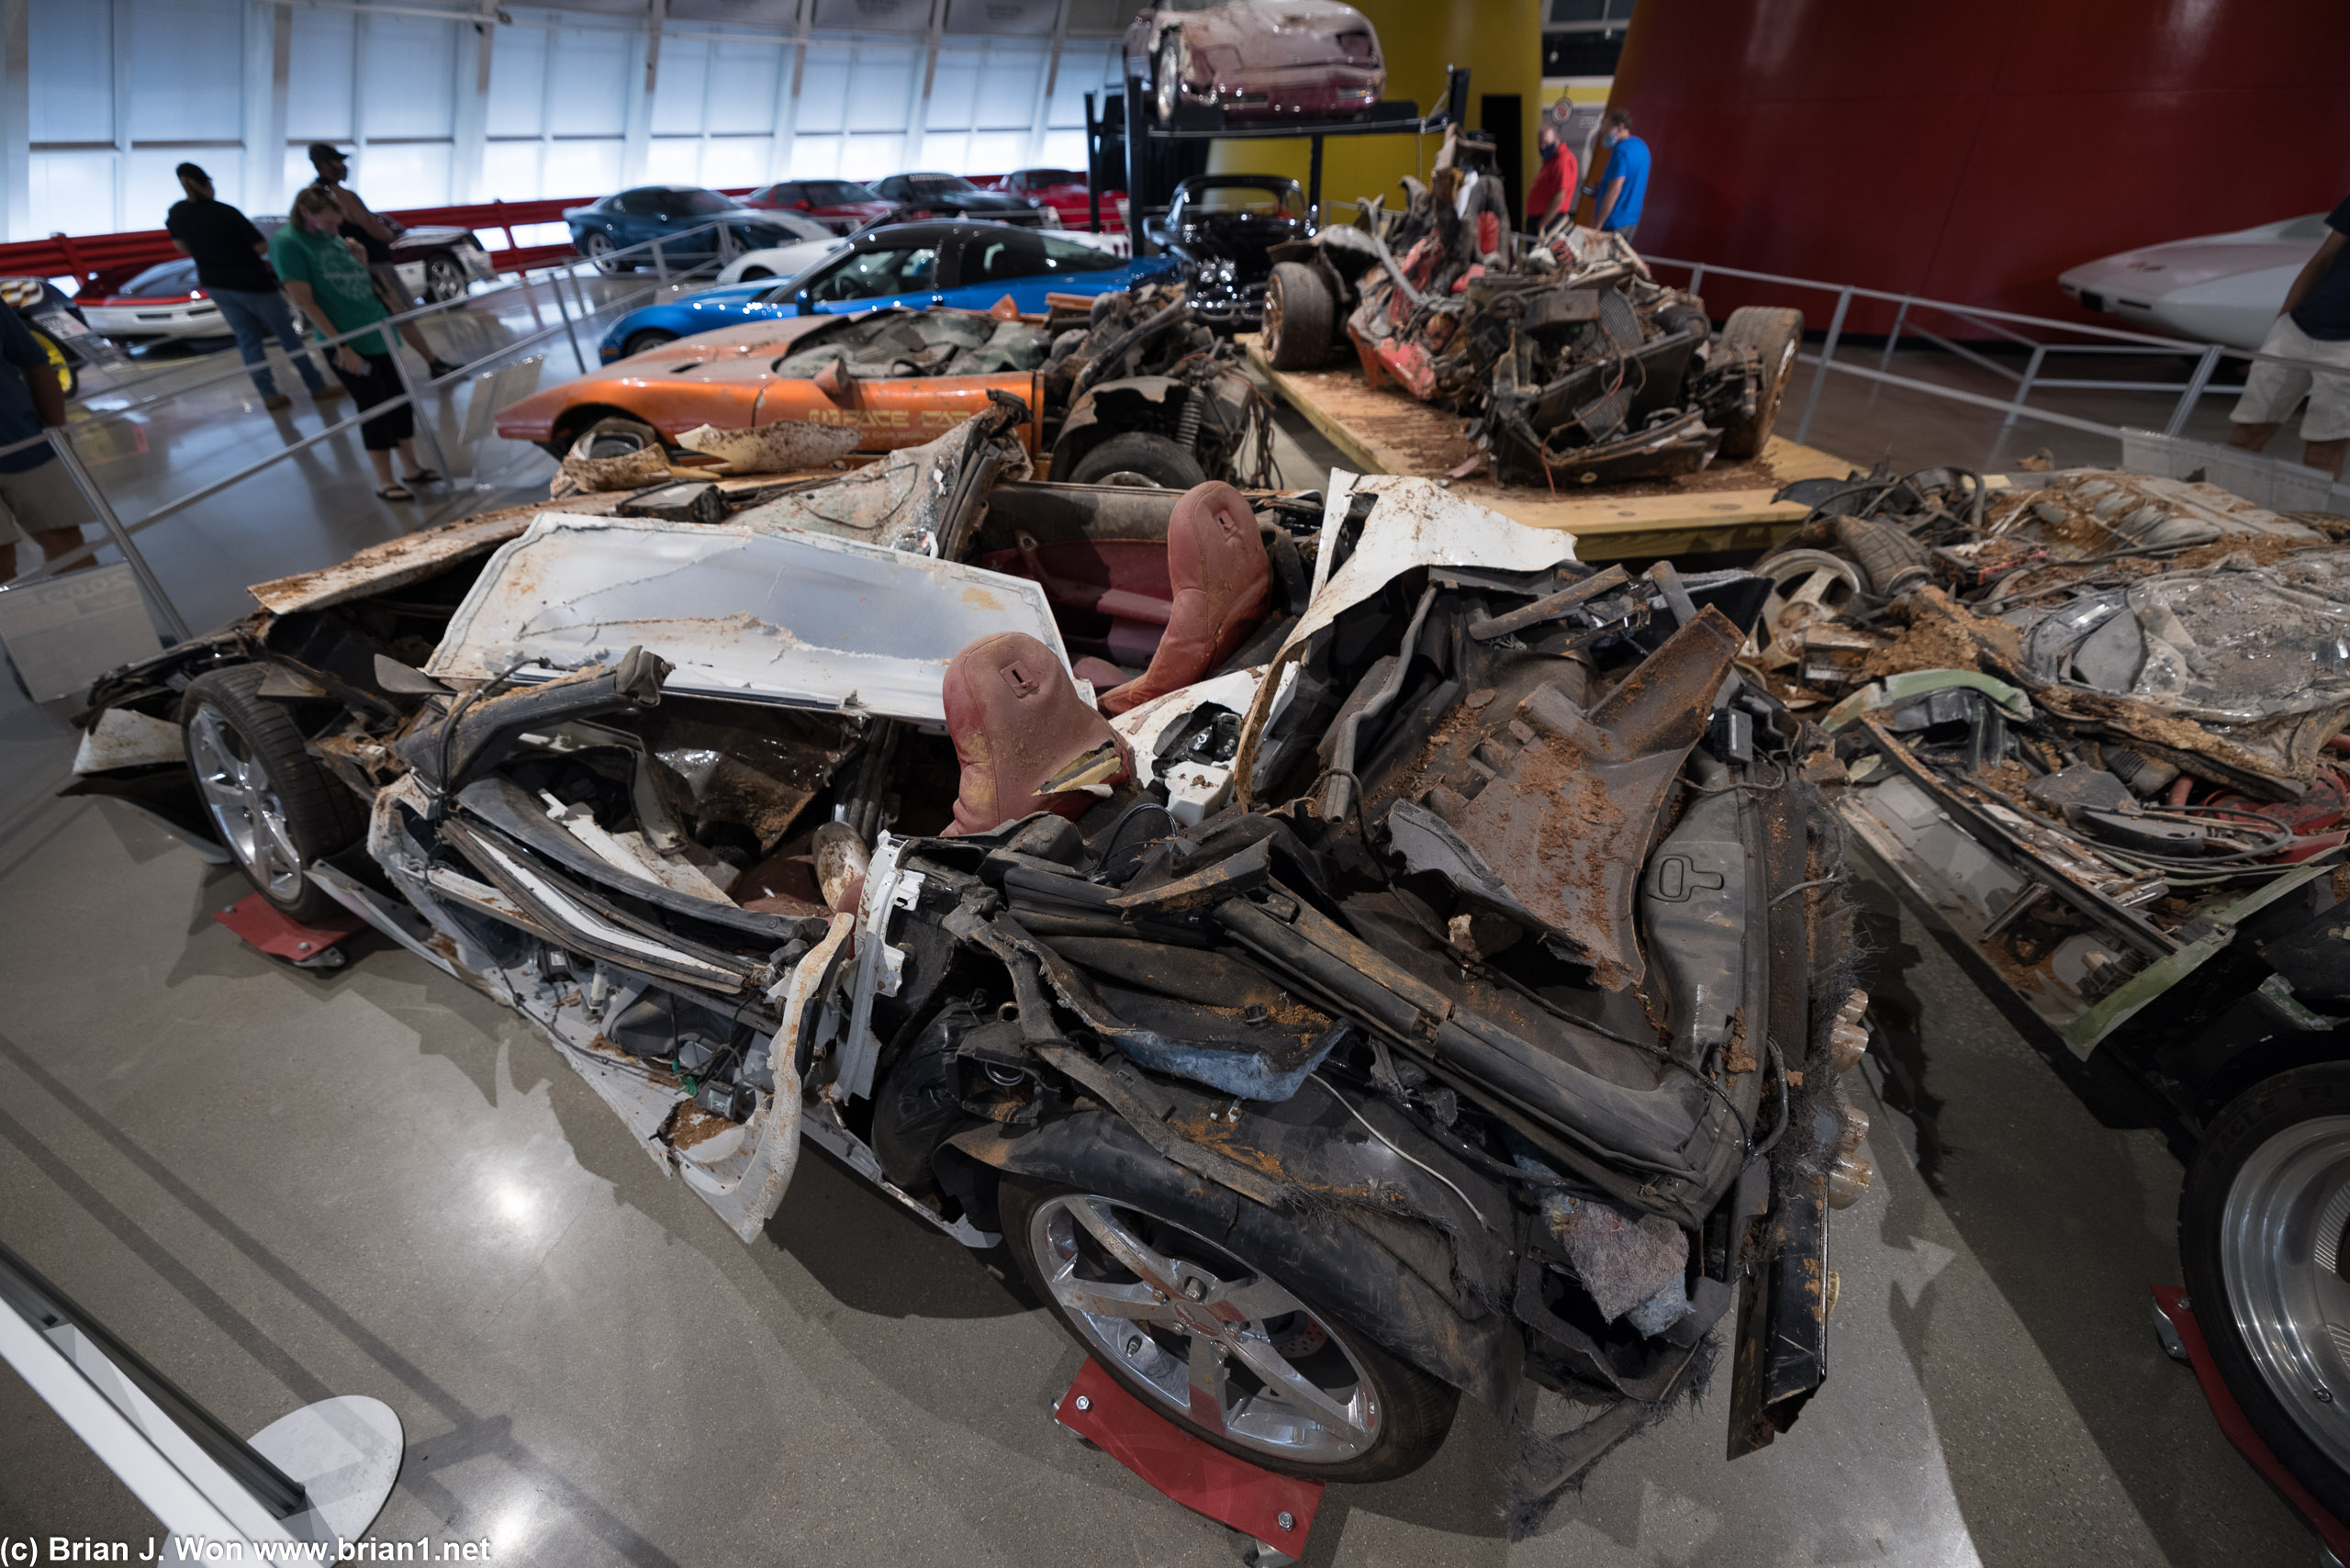 2009 Corvette, #1,500,000. Destroyed by the sinkhole.